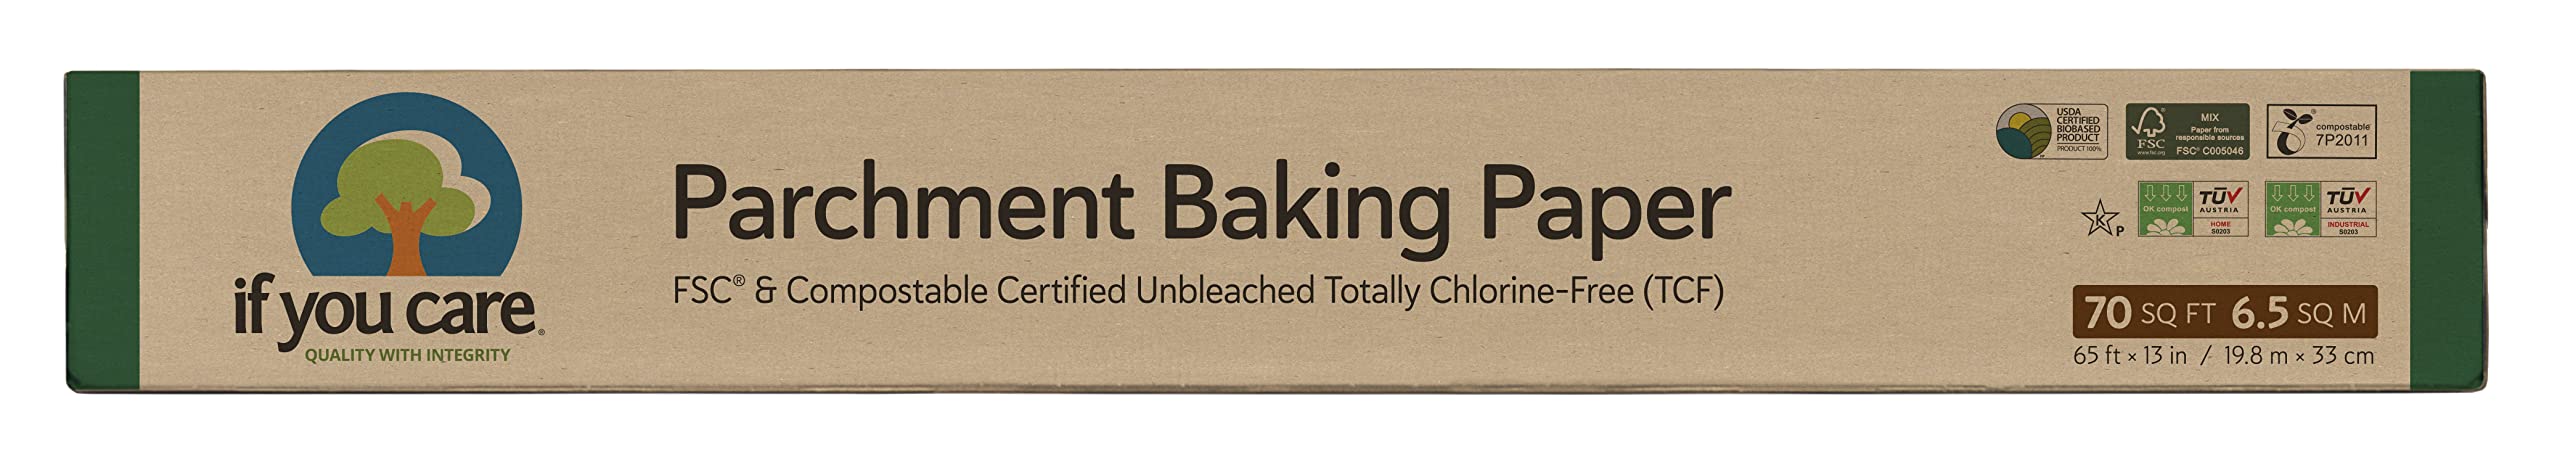 70-Sq-Ft If You Care Unbleached Parchment Baking Paper $4.39 + Free Shipping w/ Prime or on $35+